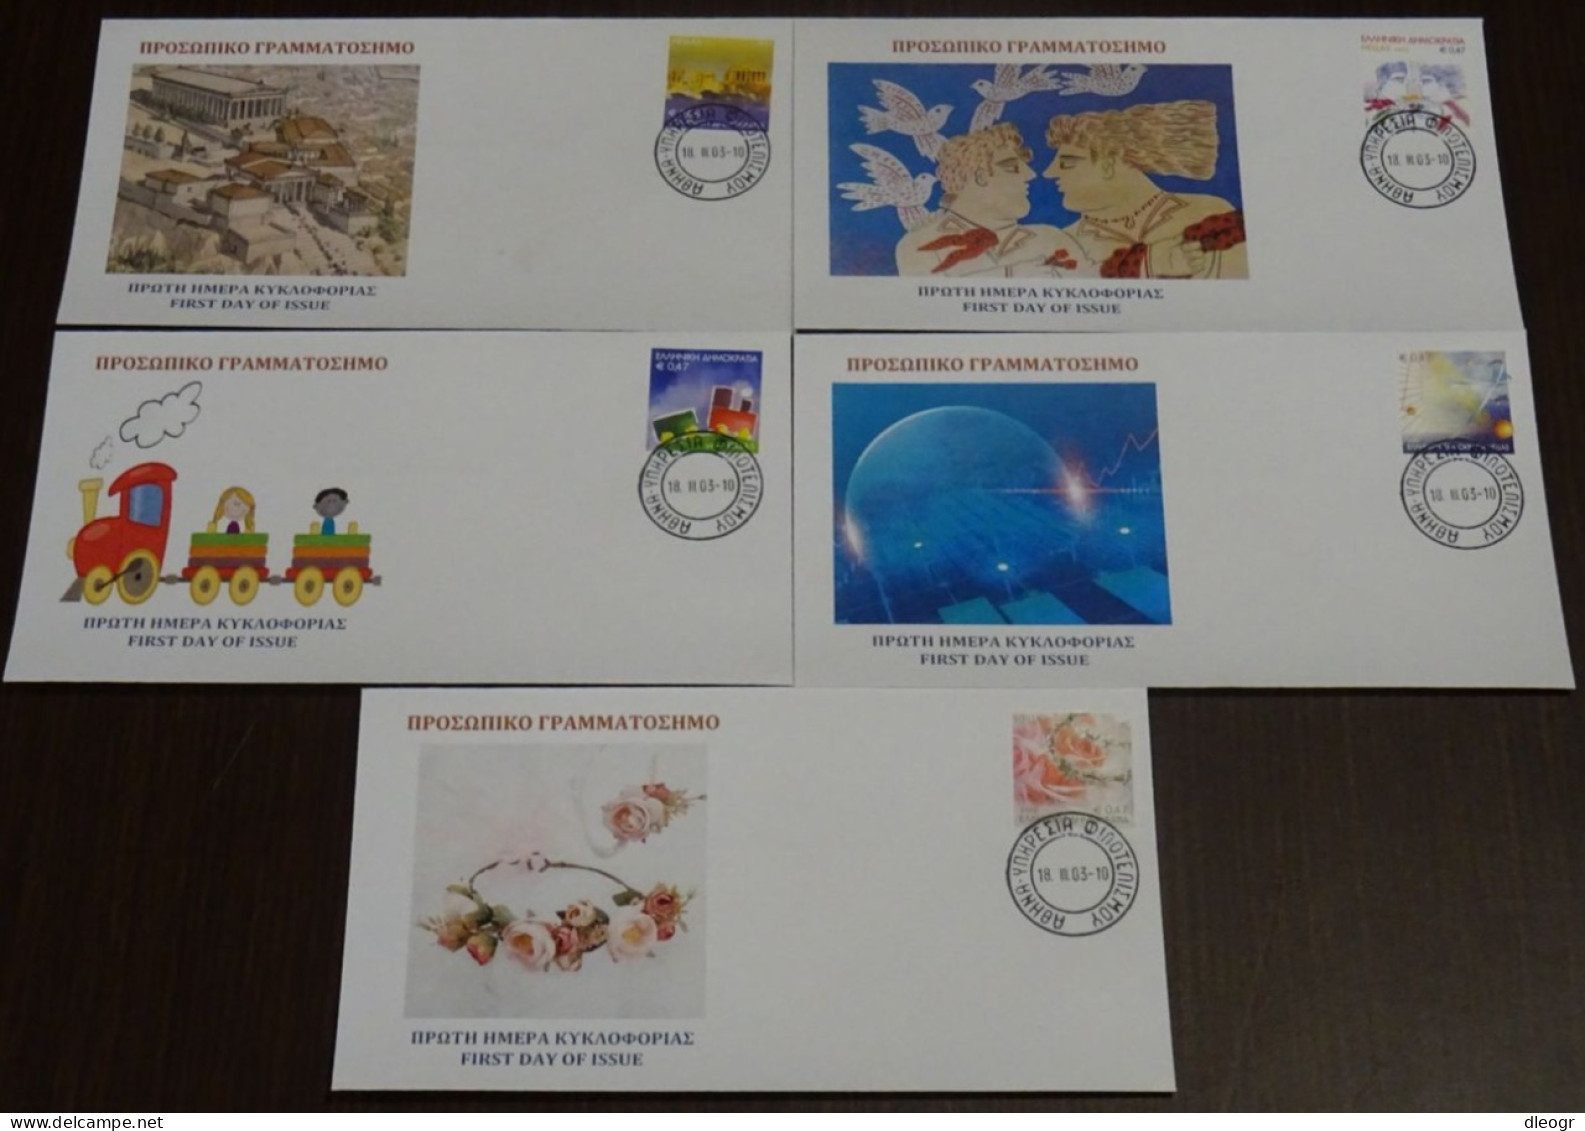 Greece 2003 Personal Stamp Unofficial FDC - FDC